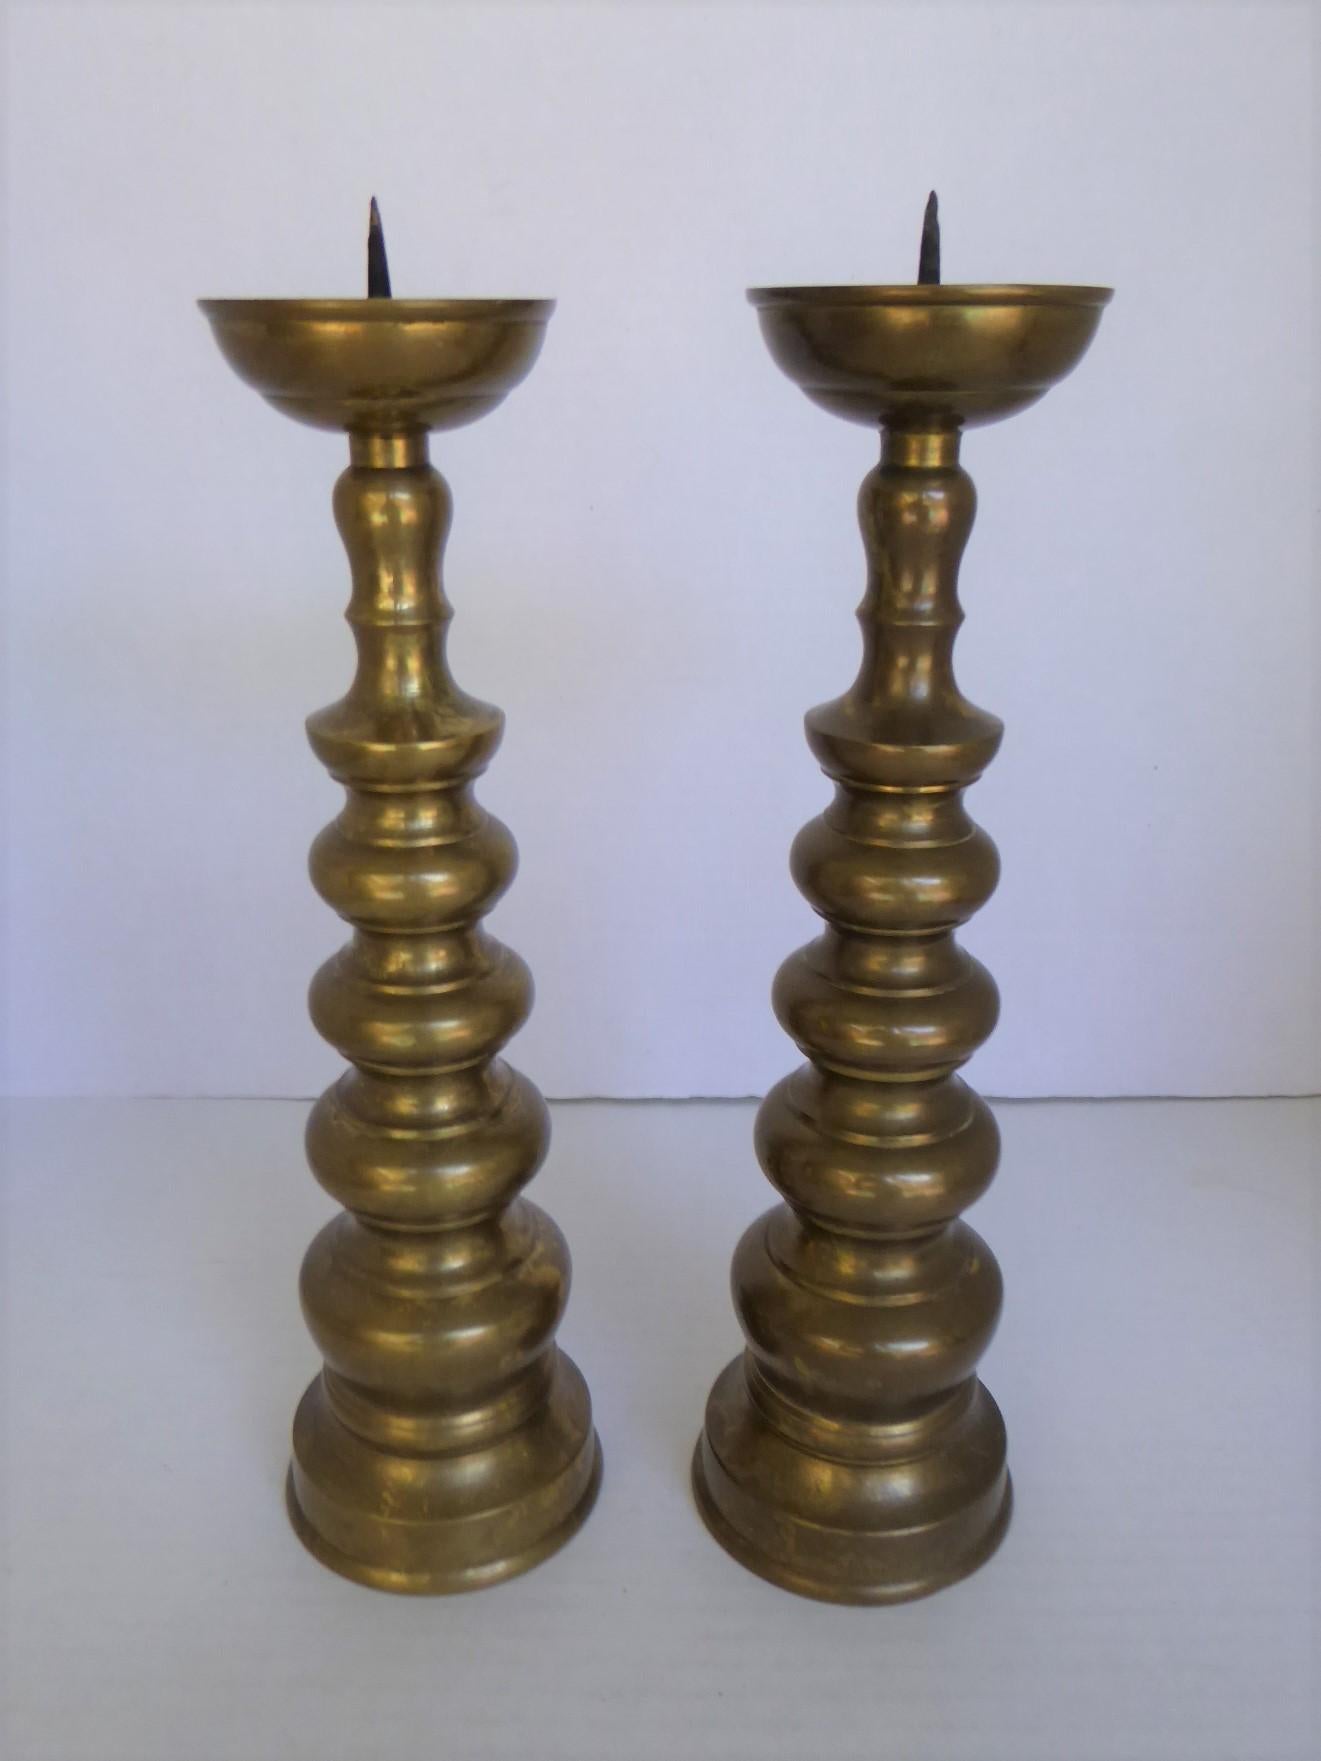 Chinese Export Vintage Pair of Brass Asian Modern Candlesticks 1960s For Sale